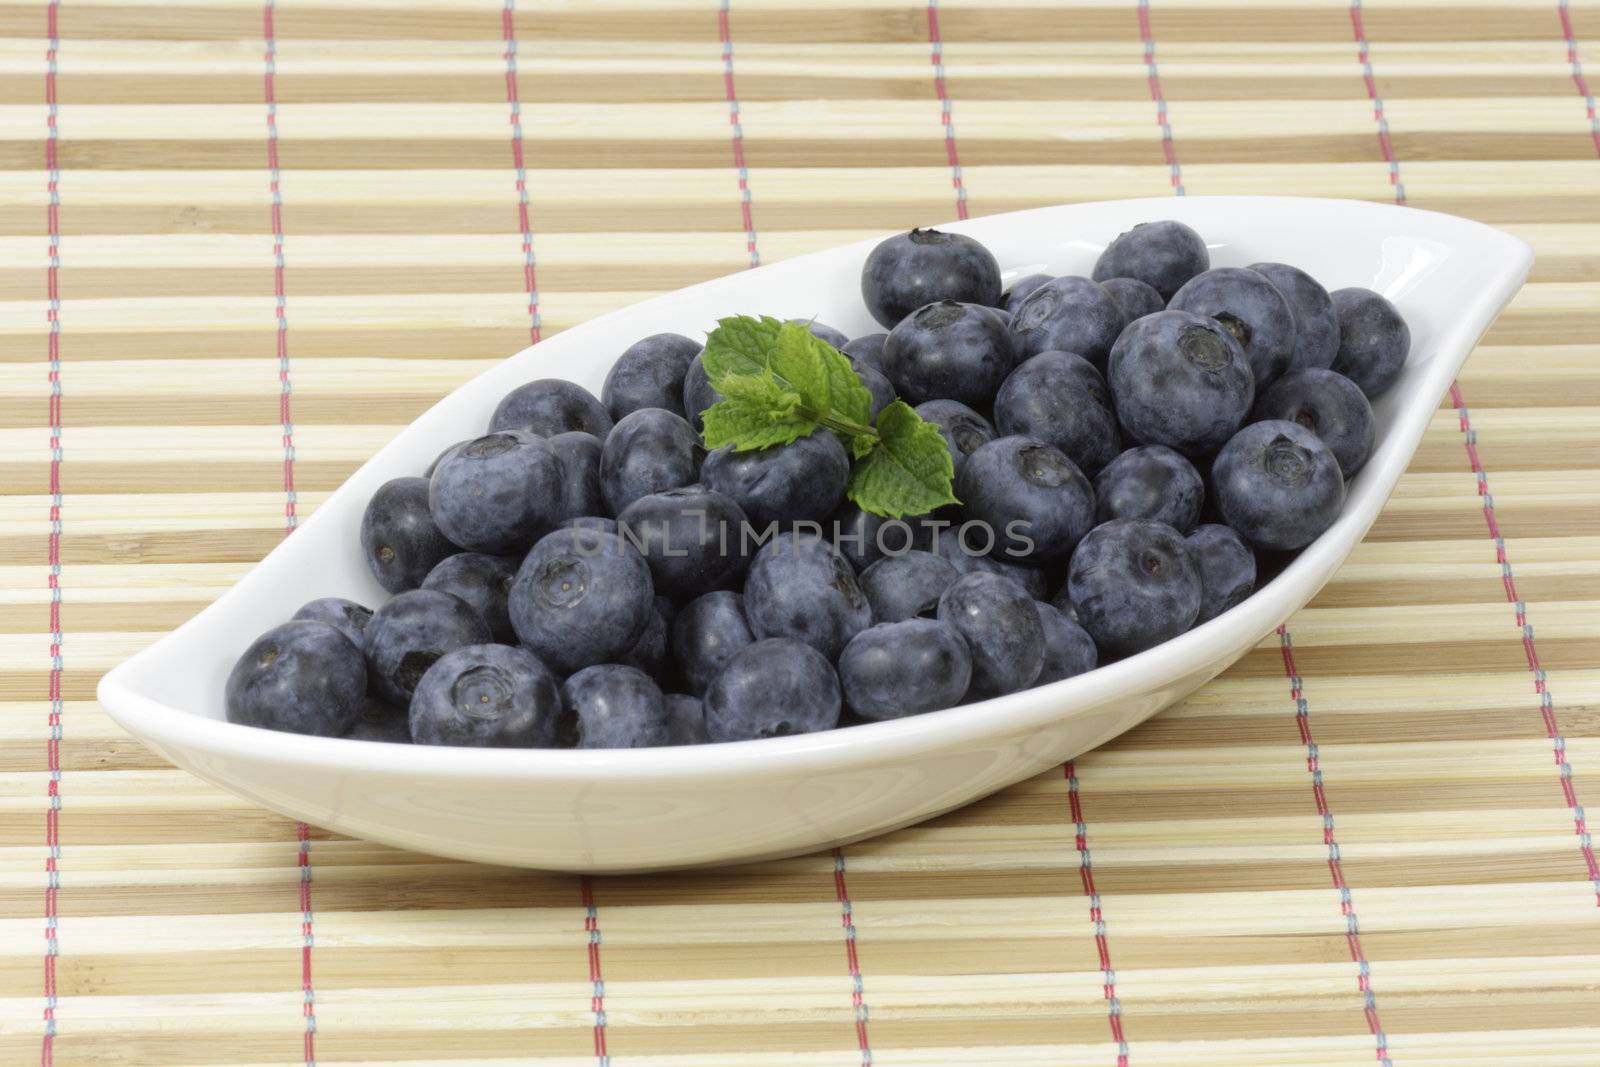 Fresh blueberries with mint leaves in a white bowl